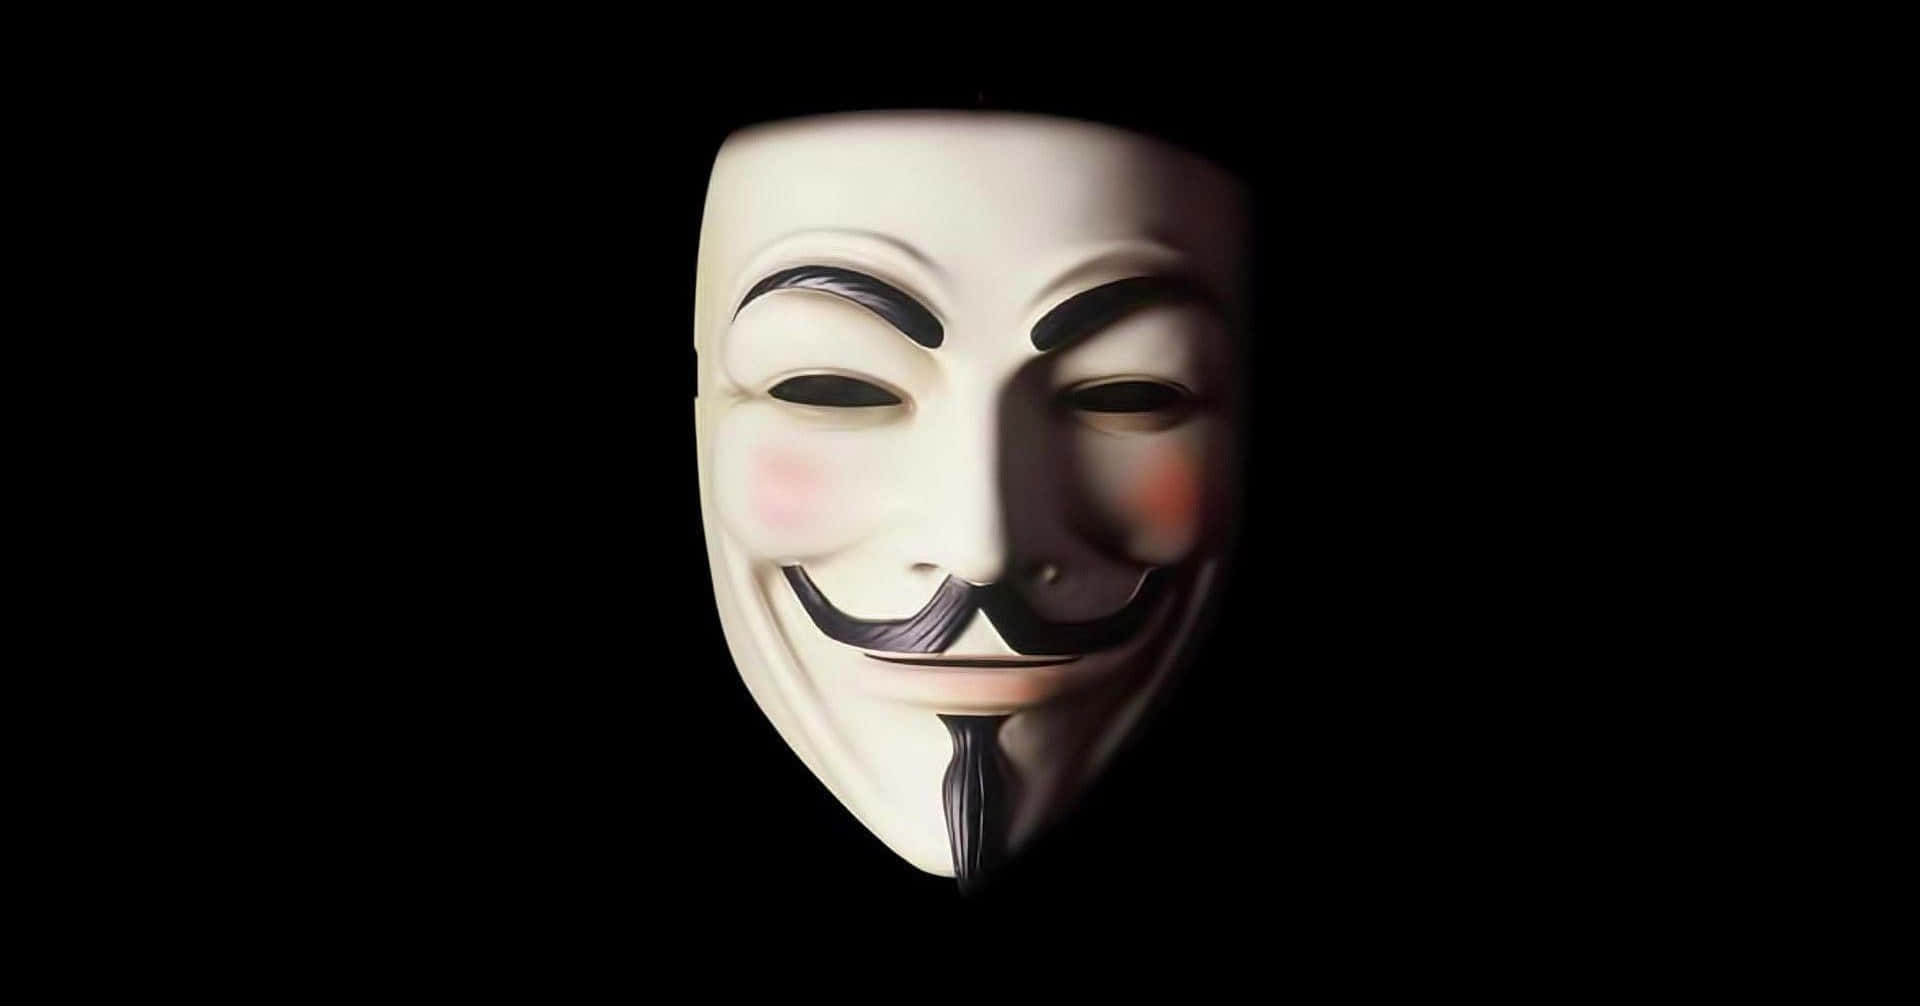 "We are Anonymous, we are legion"